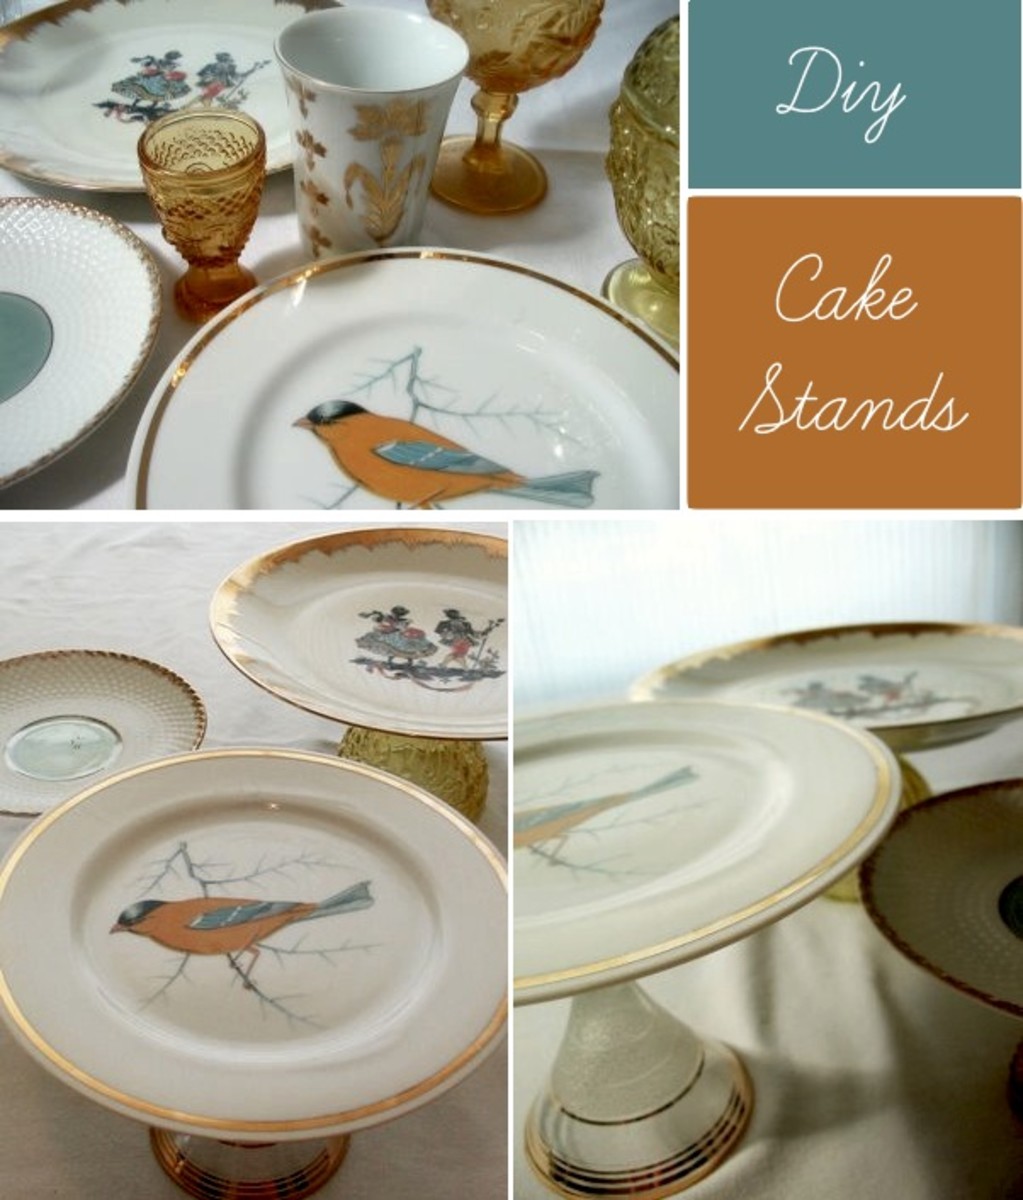 DIY Cake Stands For Only a Few Dollars, You Can Make a